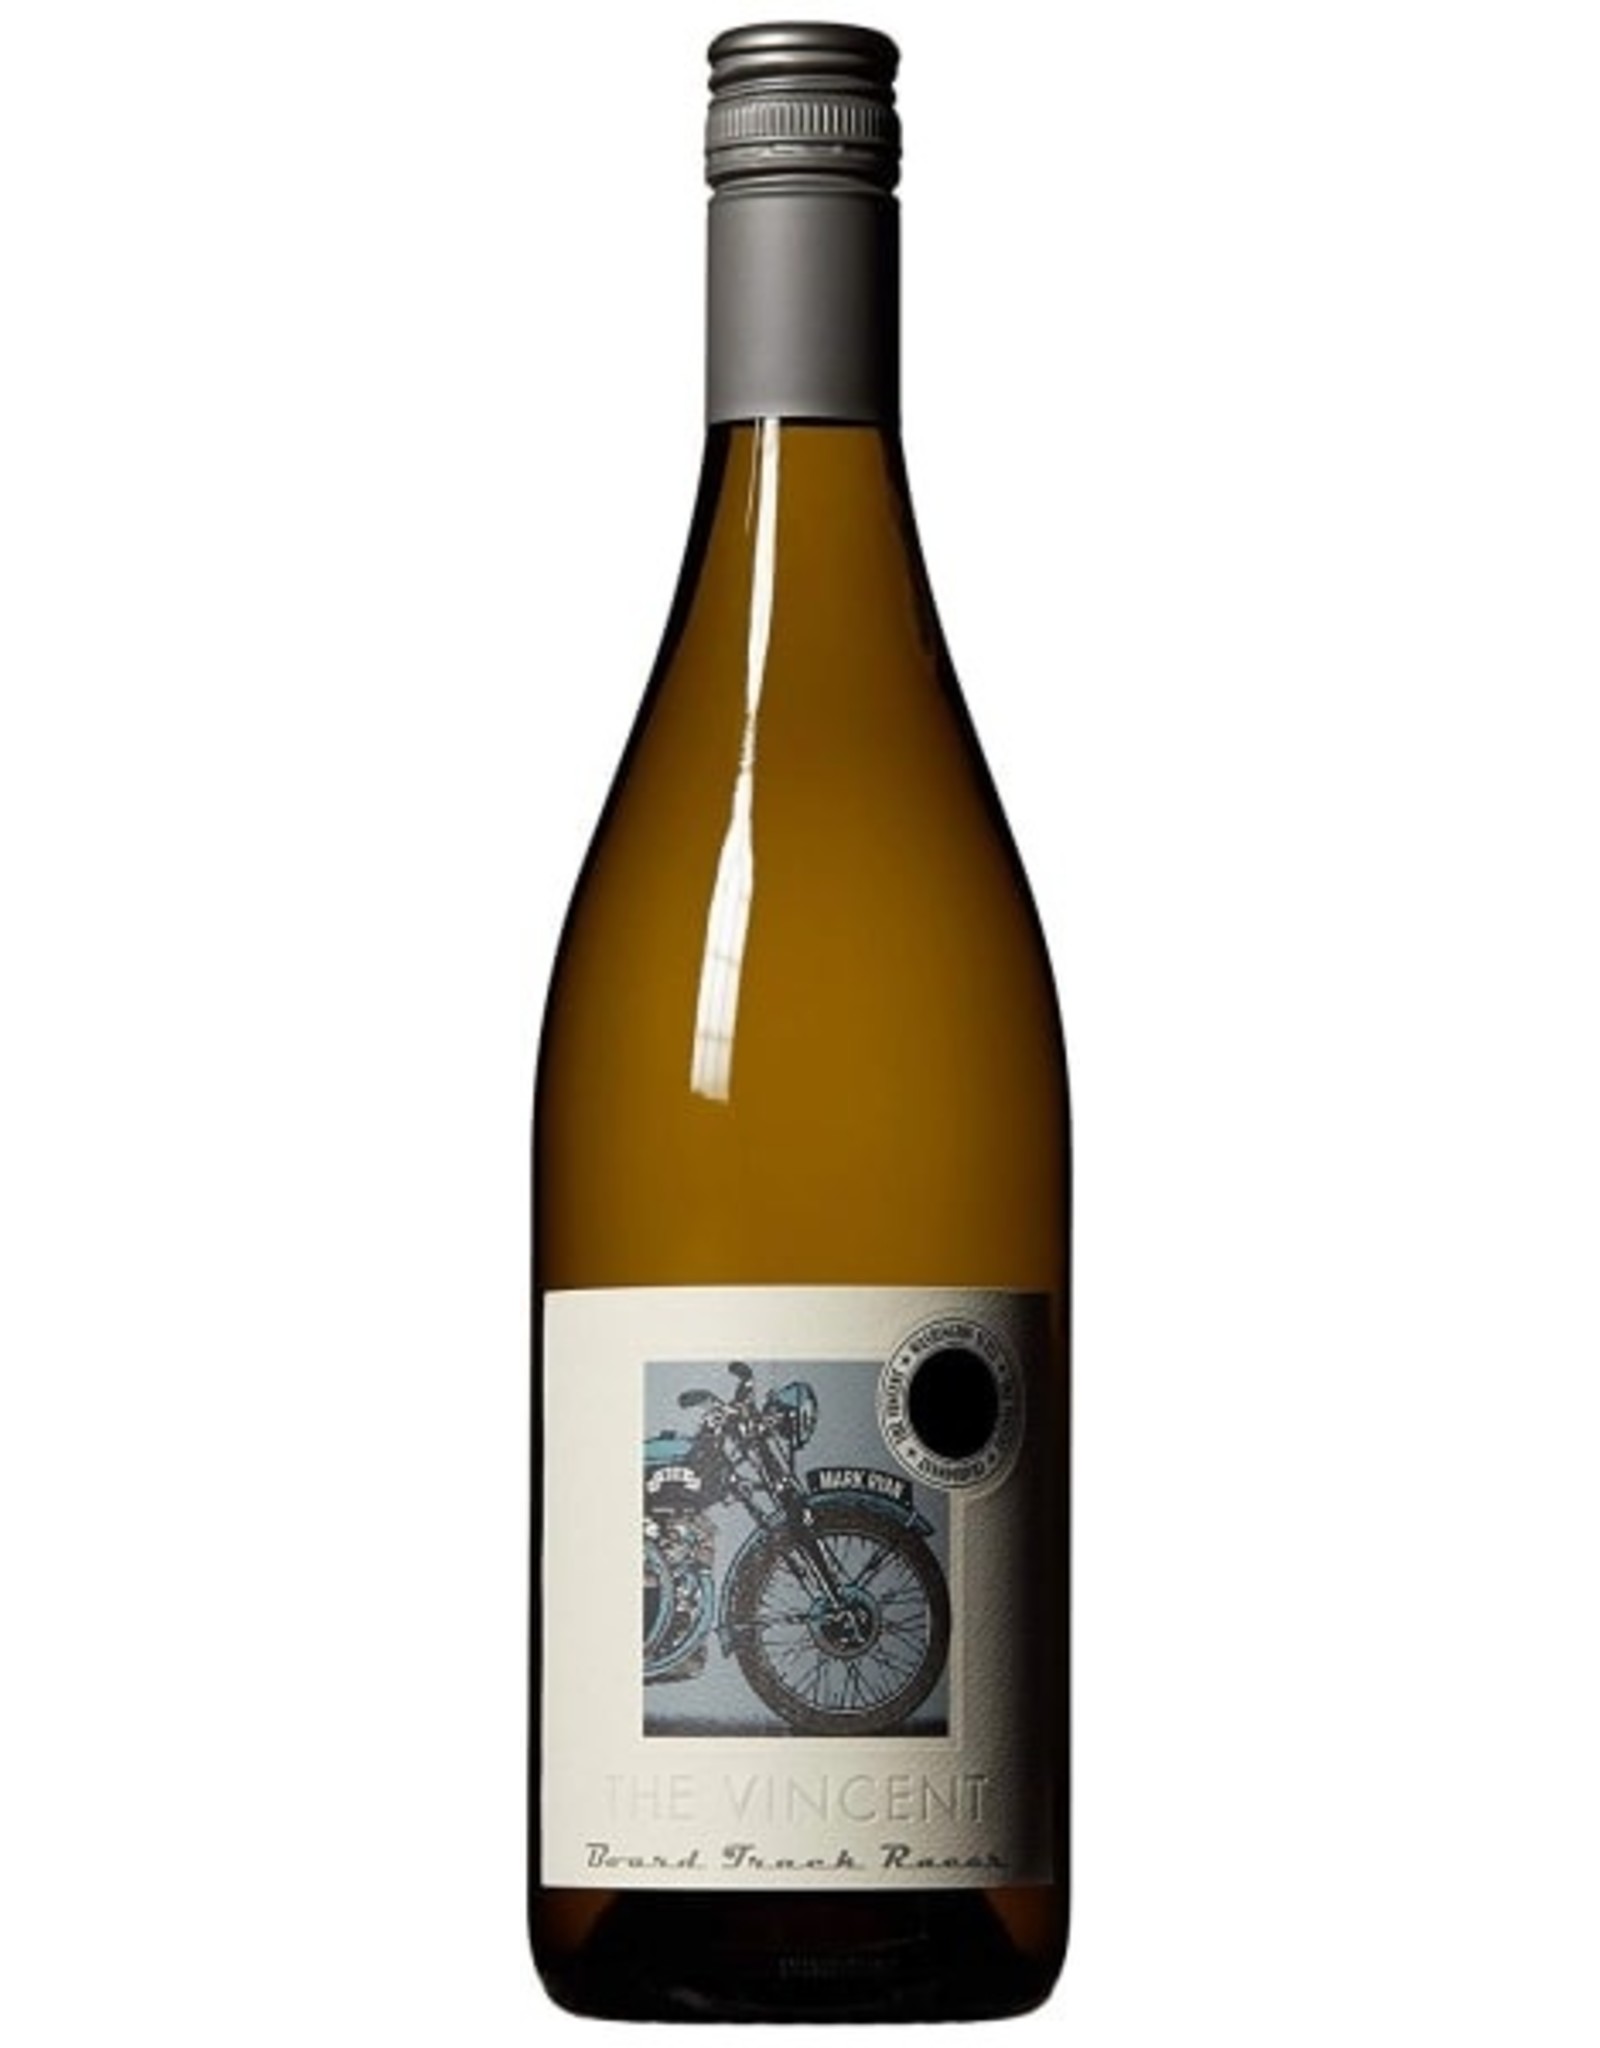 Mark Ryan Winery 'Board Track Racer' The Vincent, Chardonnay 2019